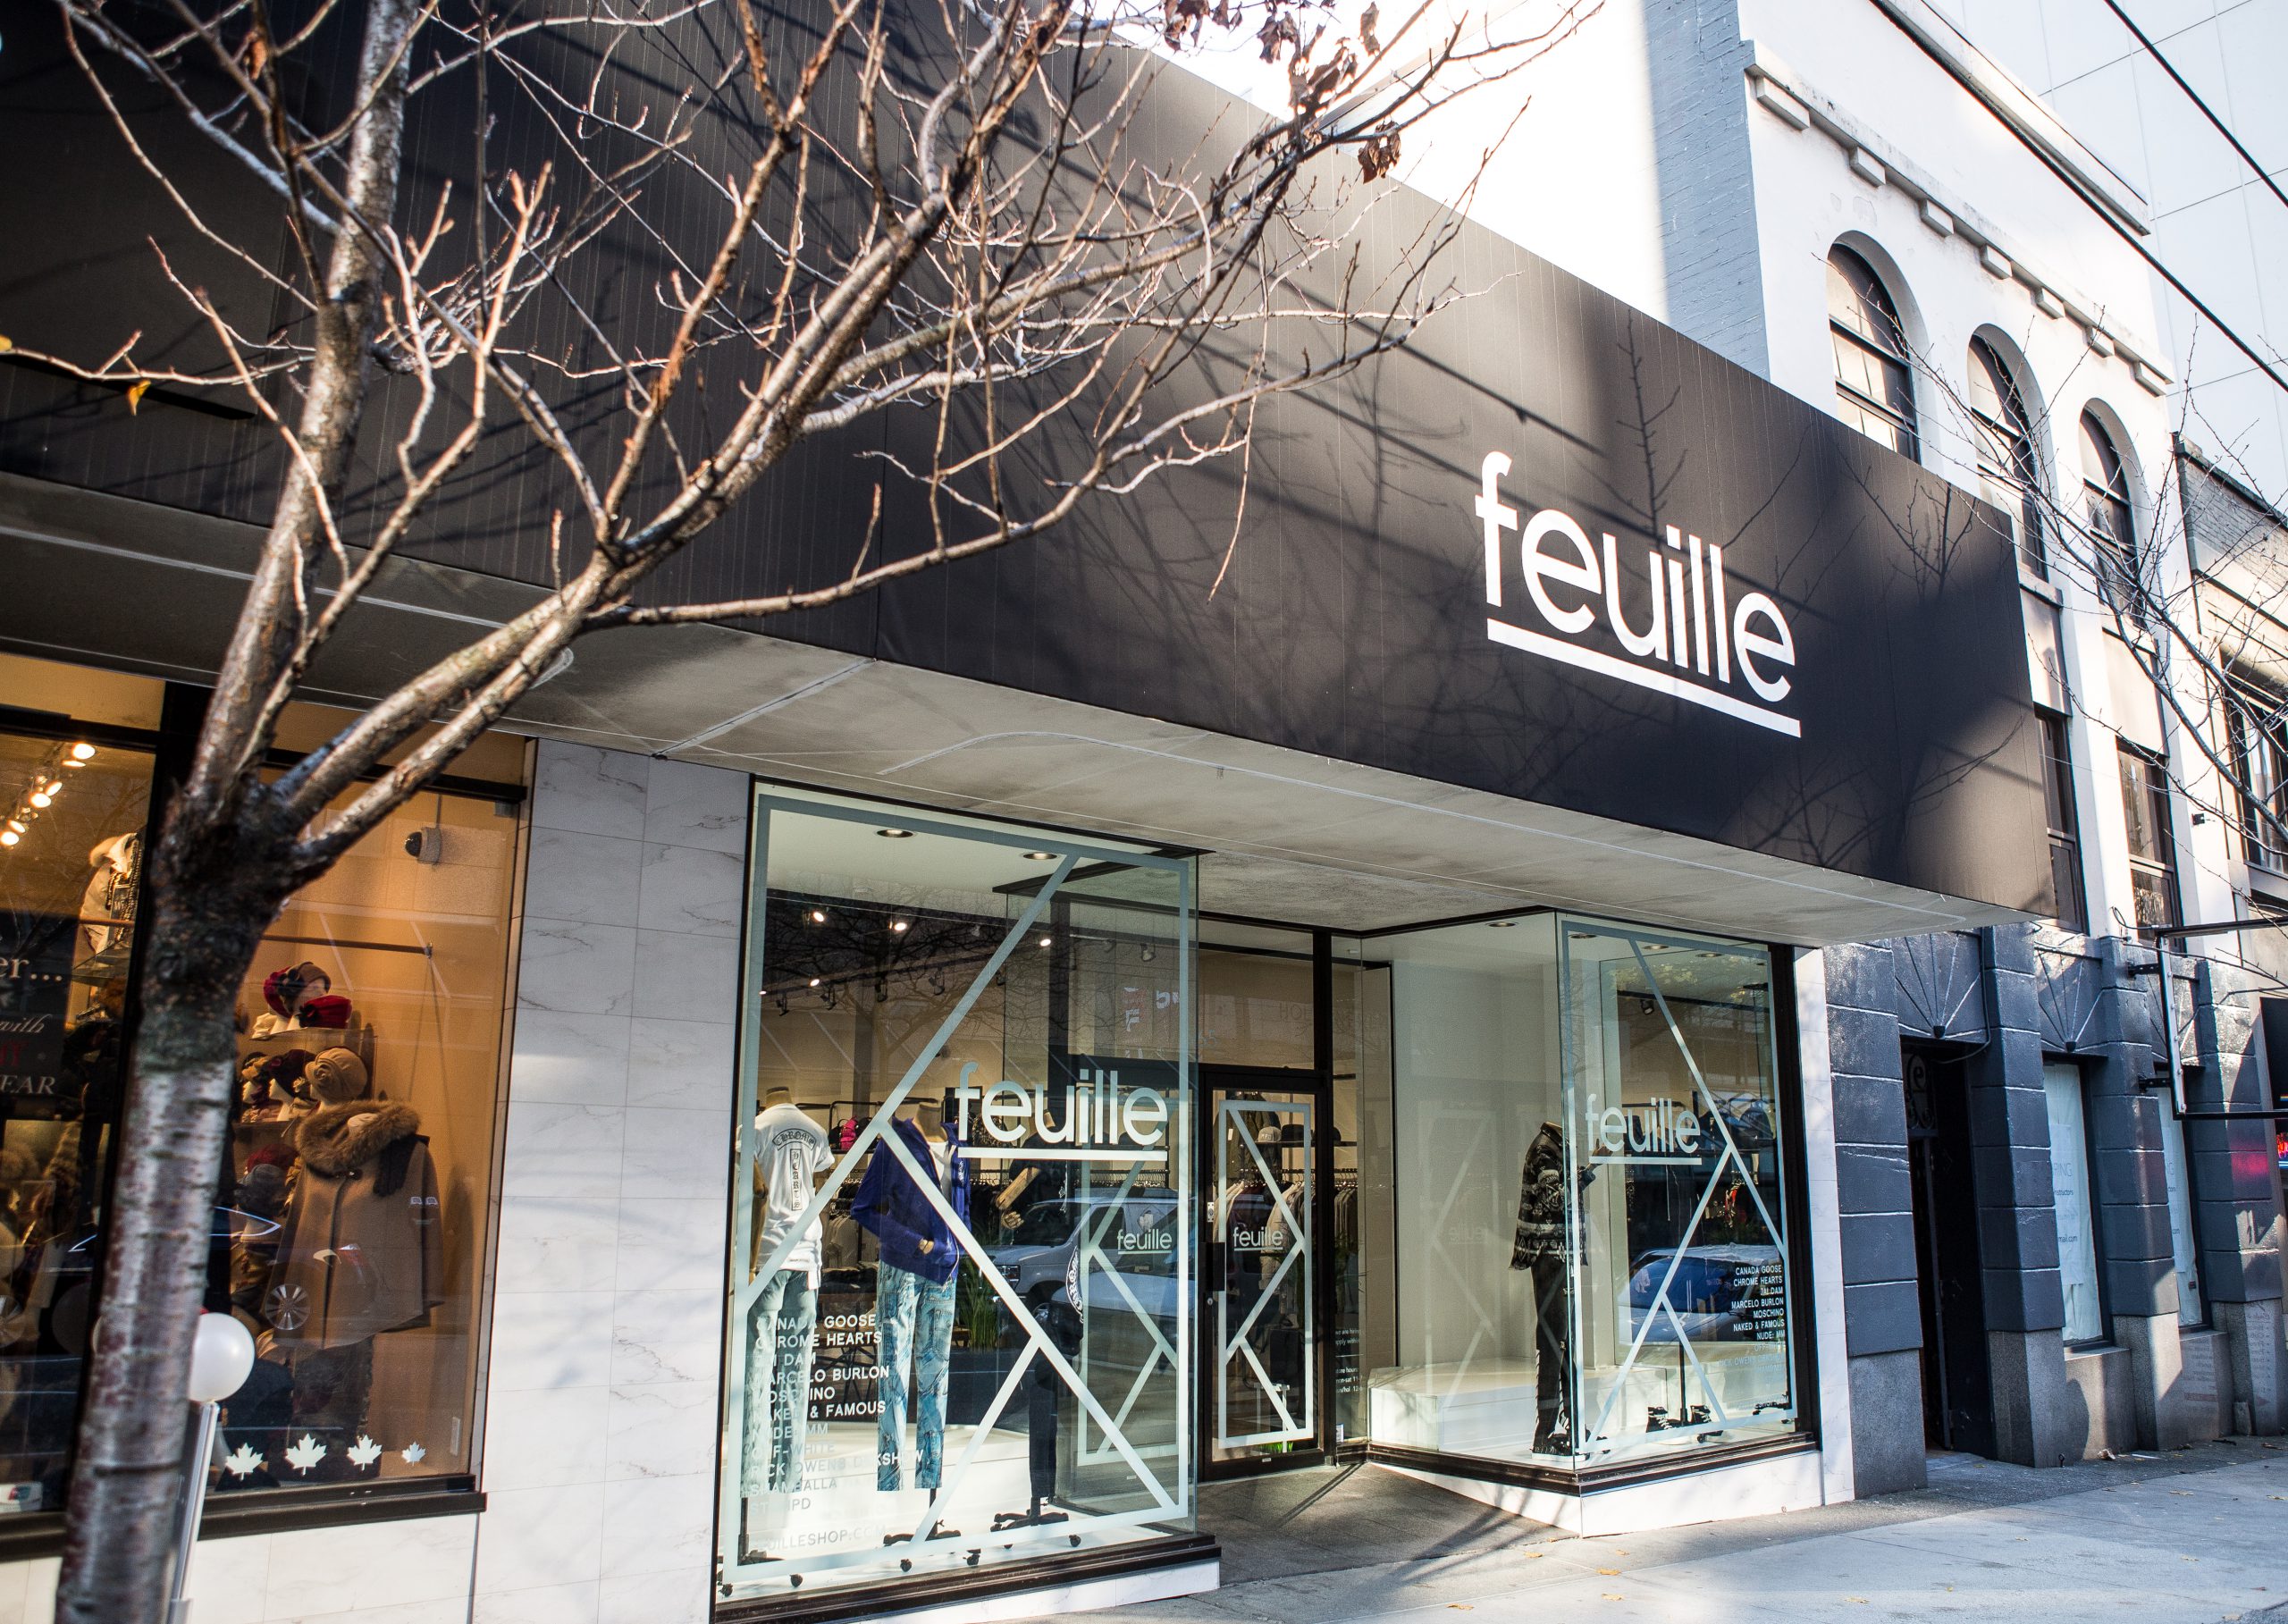 Feuille in Vancouver BC   by Cutler